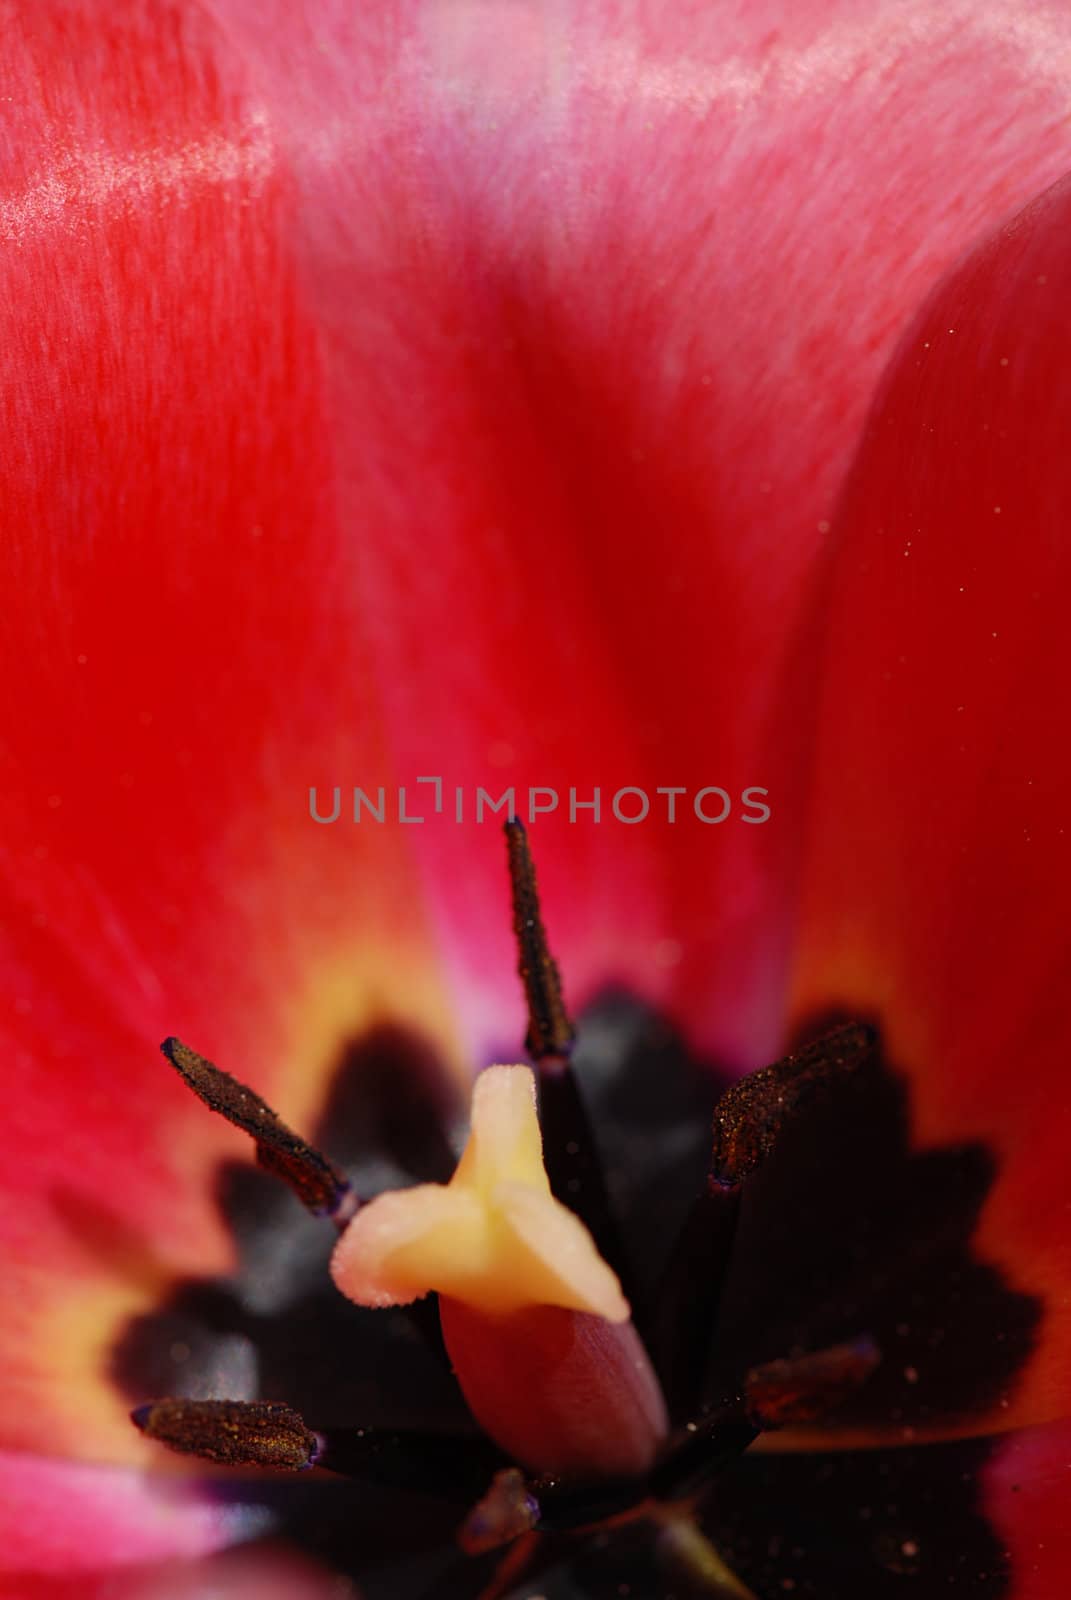 Macro shot of a tulip flower with a shallow DOF